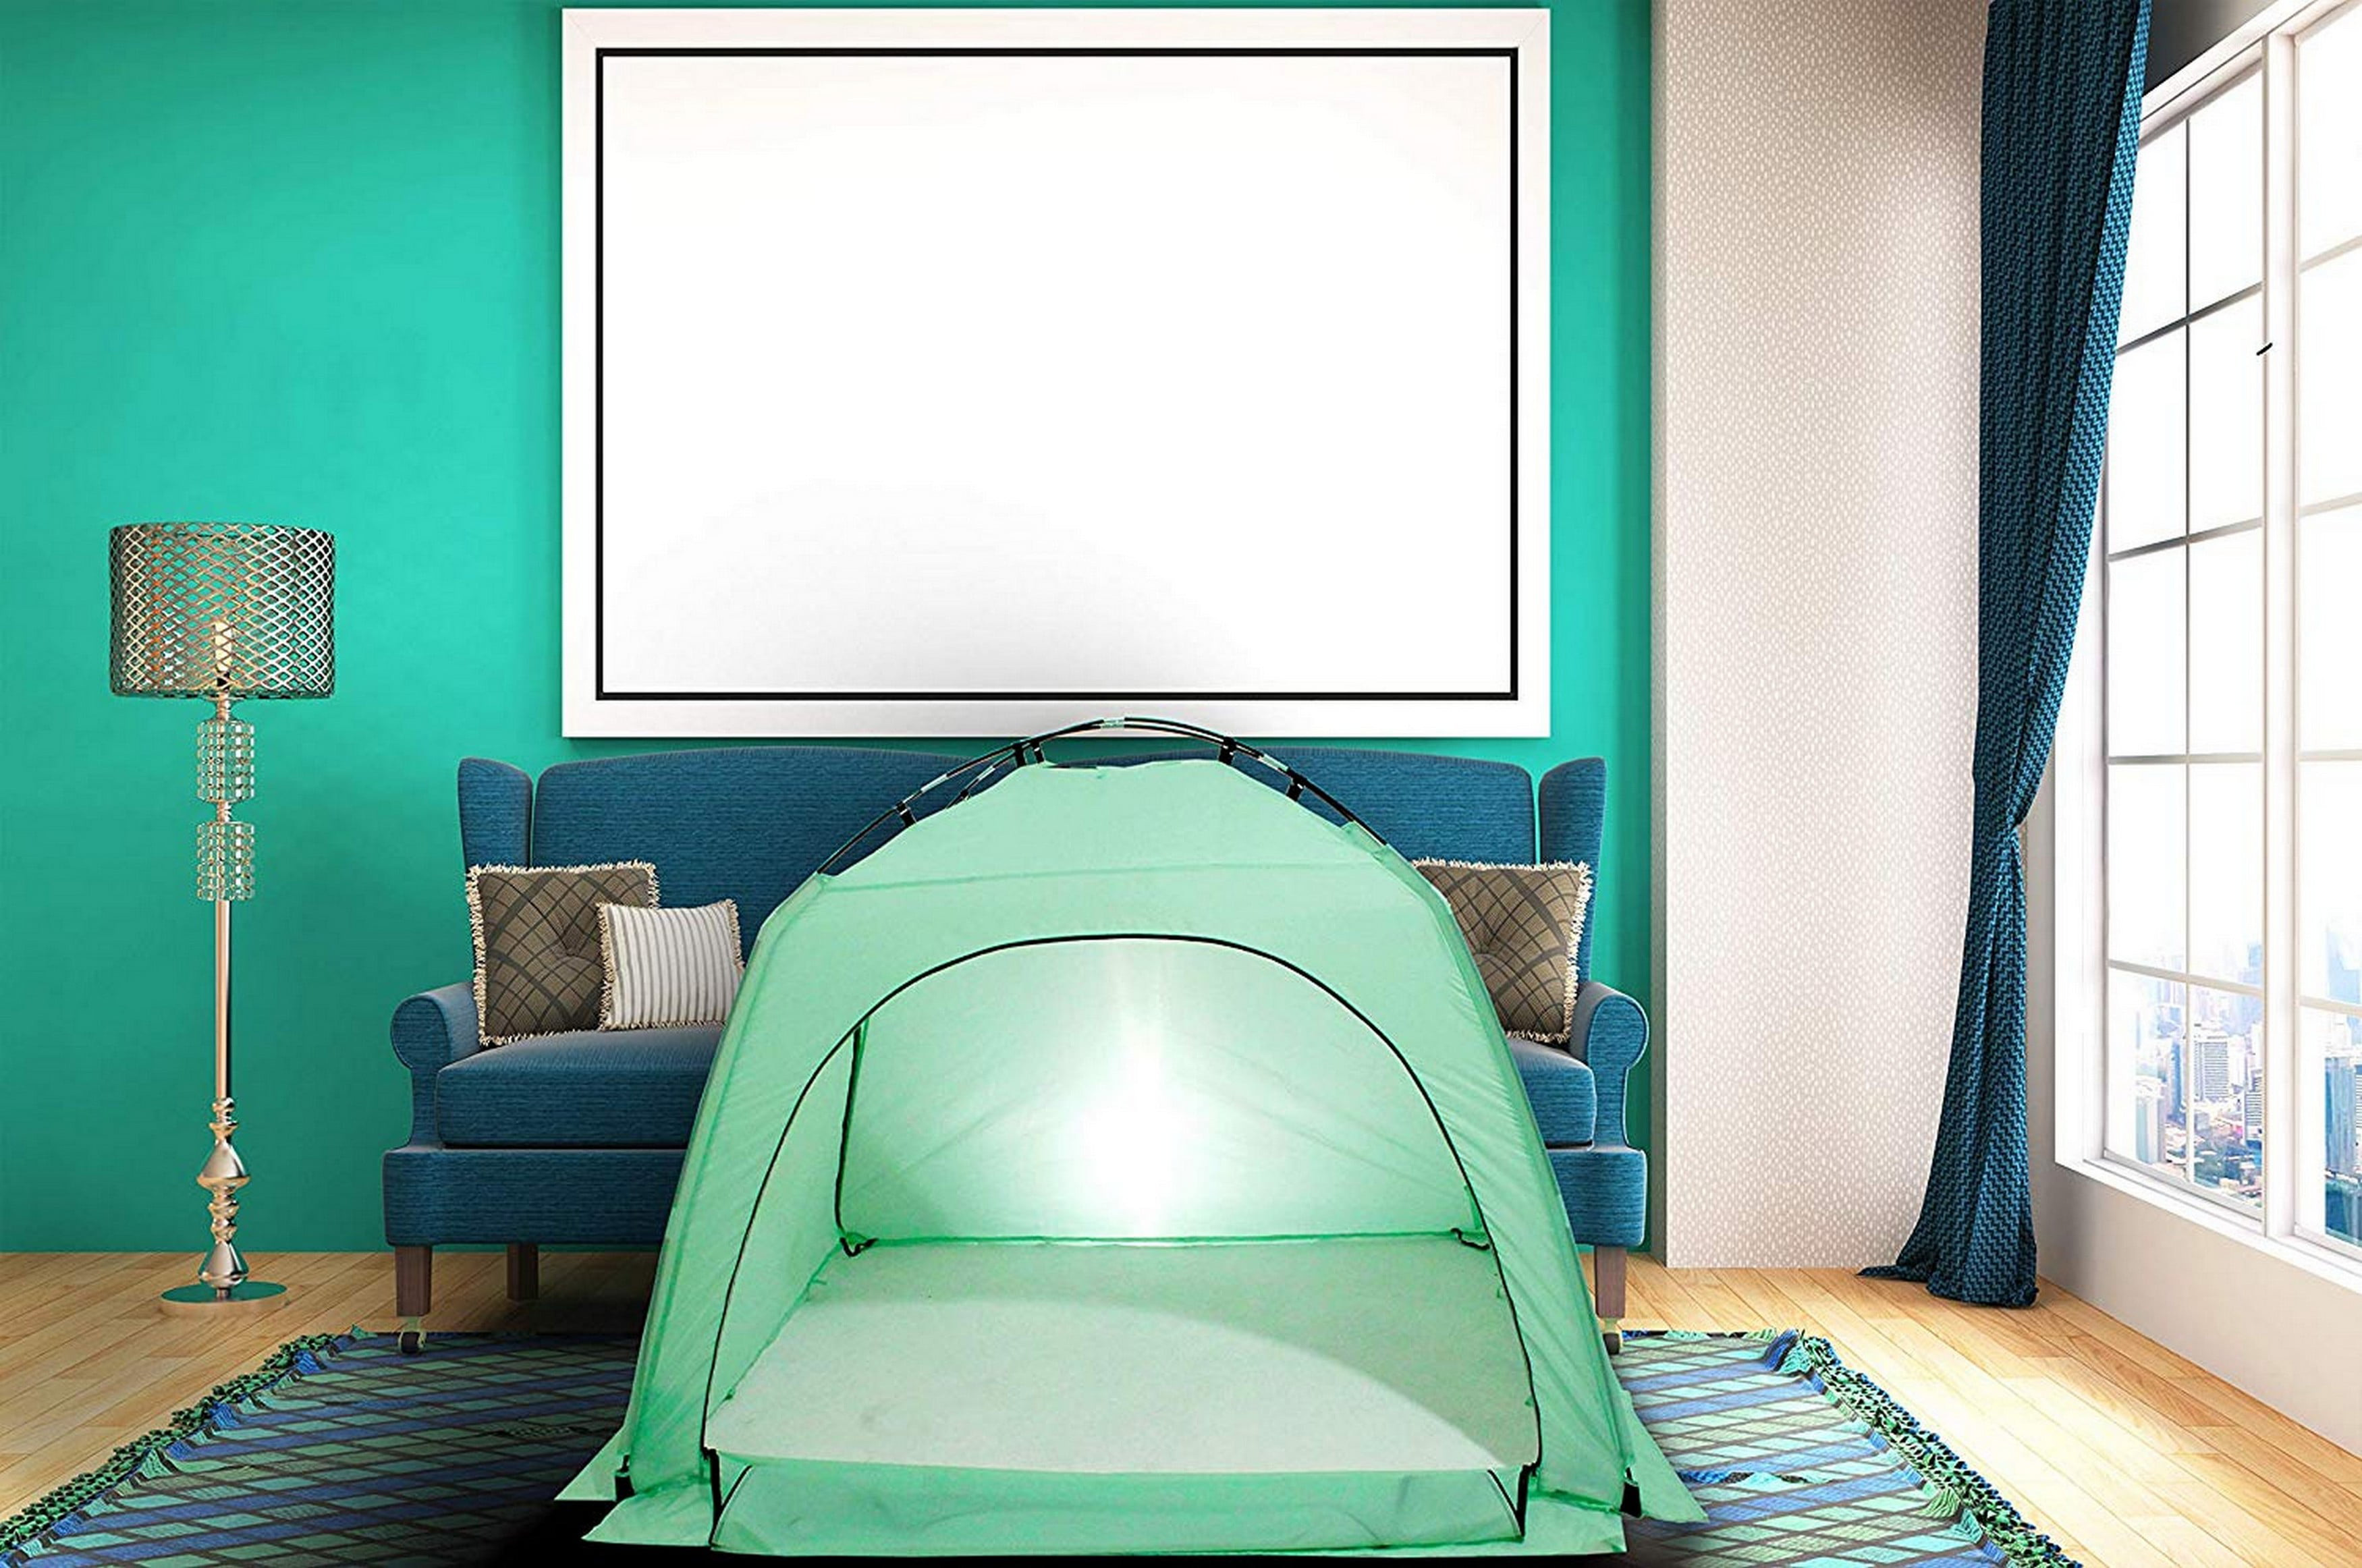 Explopur Tent On Bed Size 1 Bed Canopy Bed Tents Indoor Privacy Tent On Bed for Cozy Sleep 